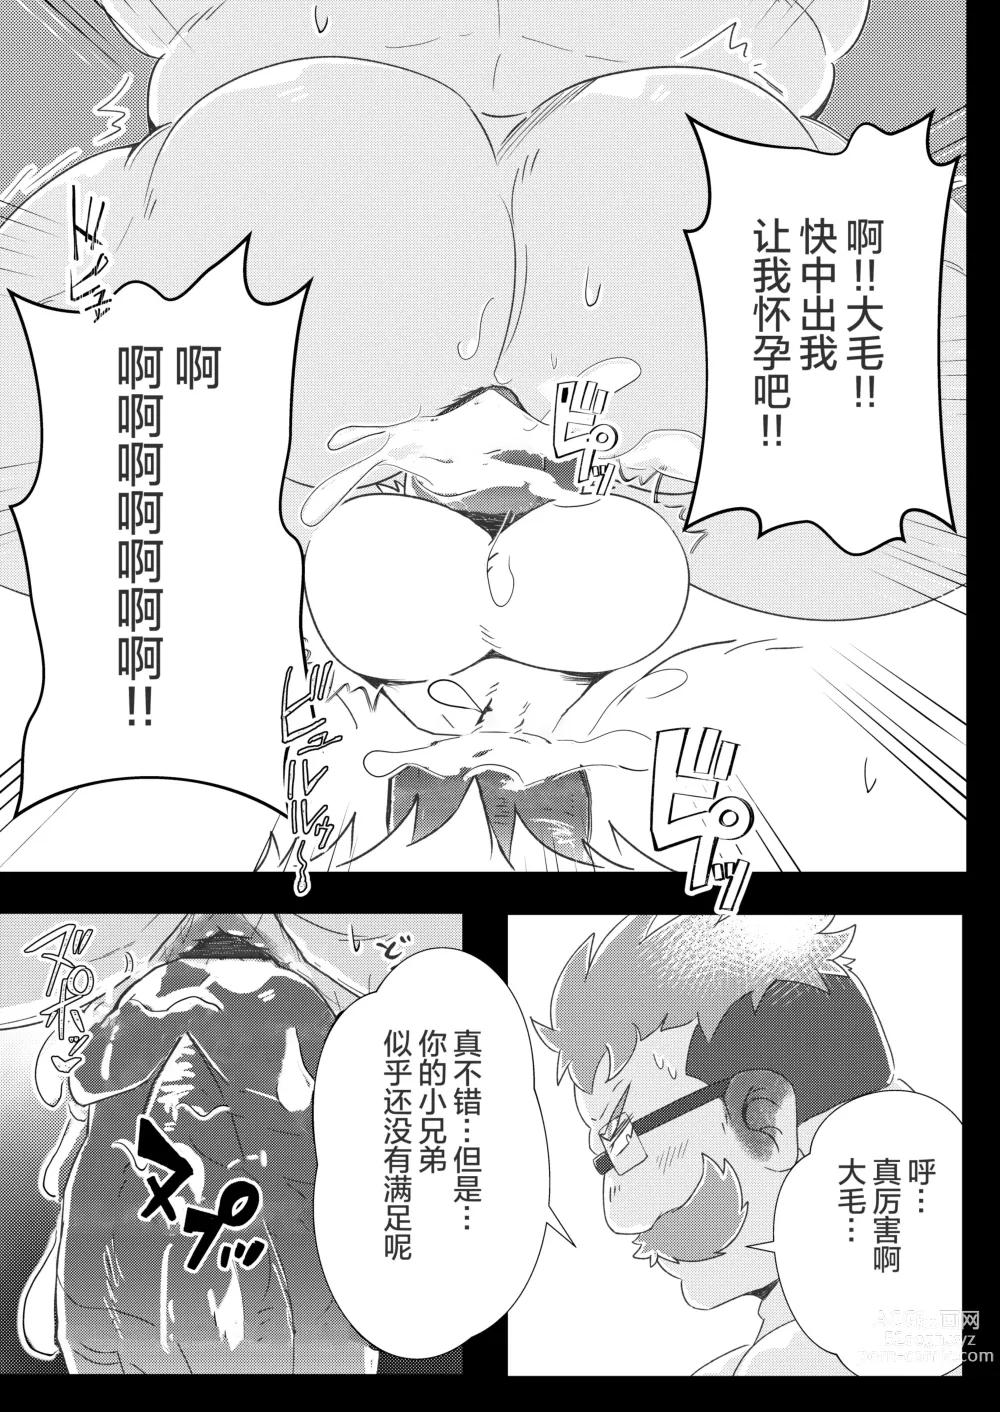 Page 16 of doujinshi 情狼火辣辣 (decensored)